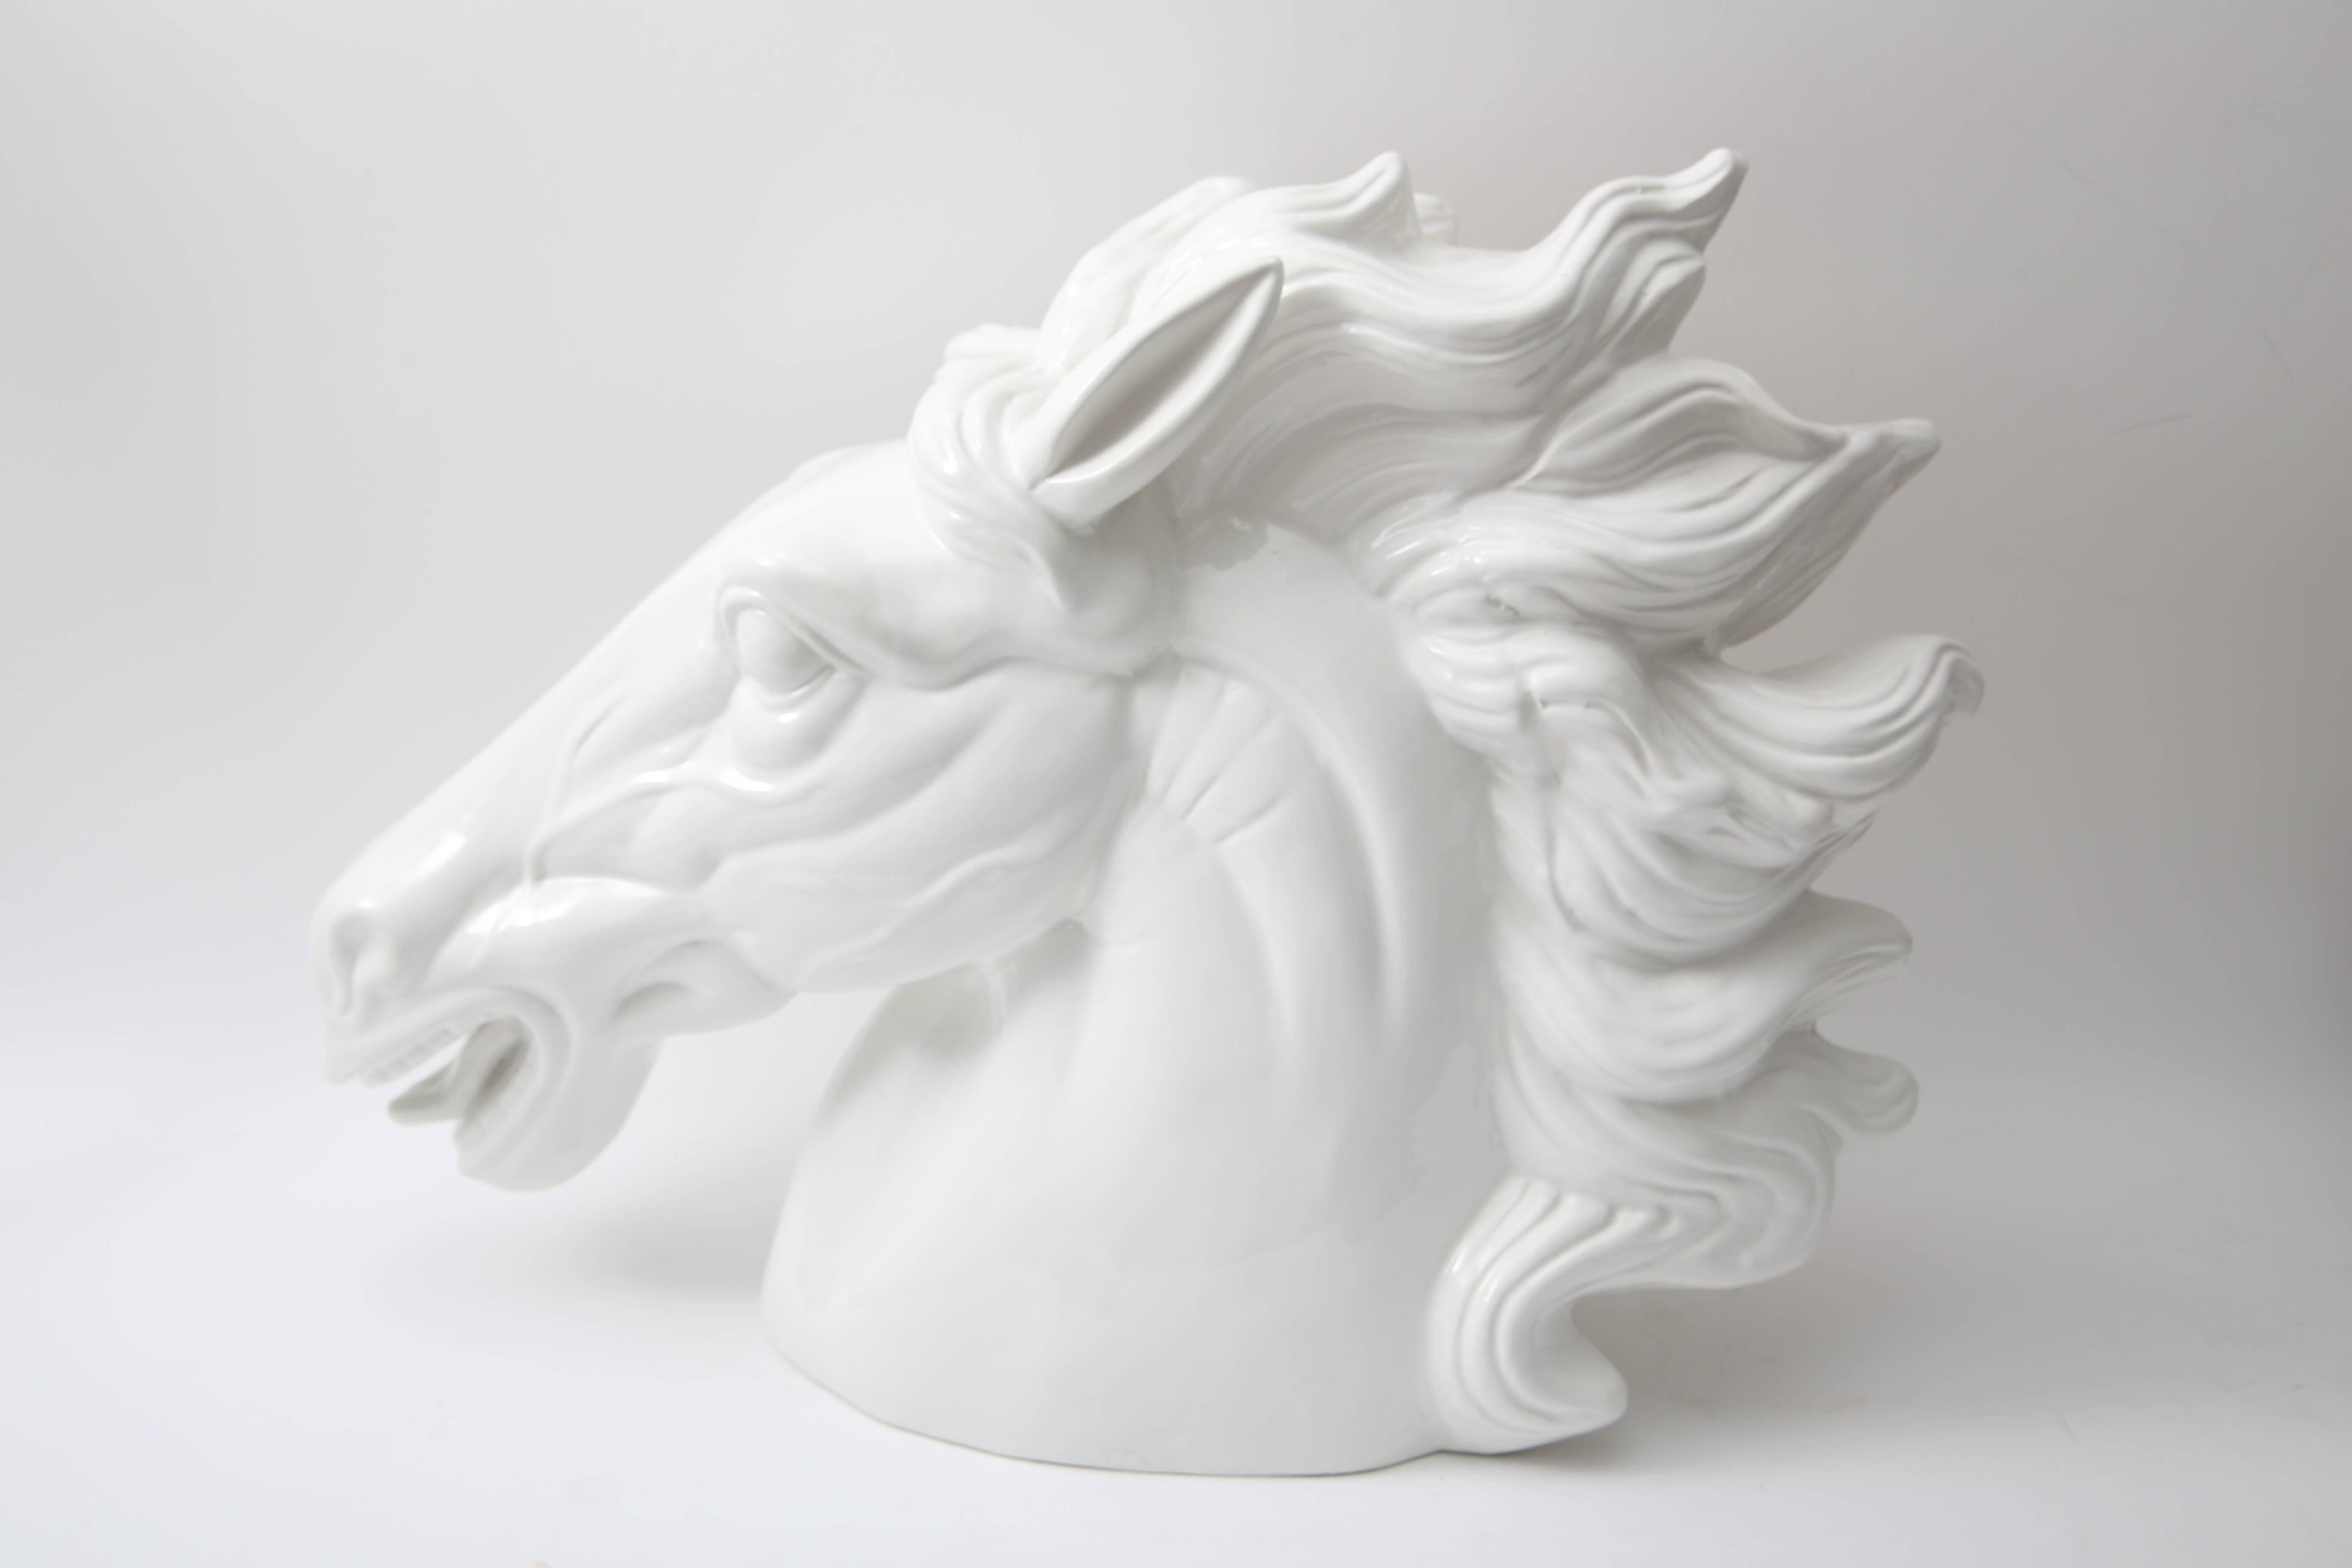 This large-scale figure of a horse head was produced in Italy and dates to the late 20th century. The white glaze gives this piece a modern look and captures the elegance and beauty of the horse.